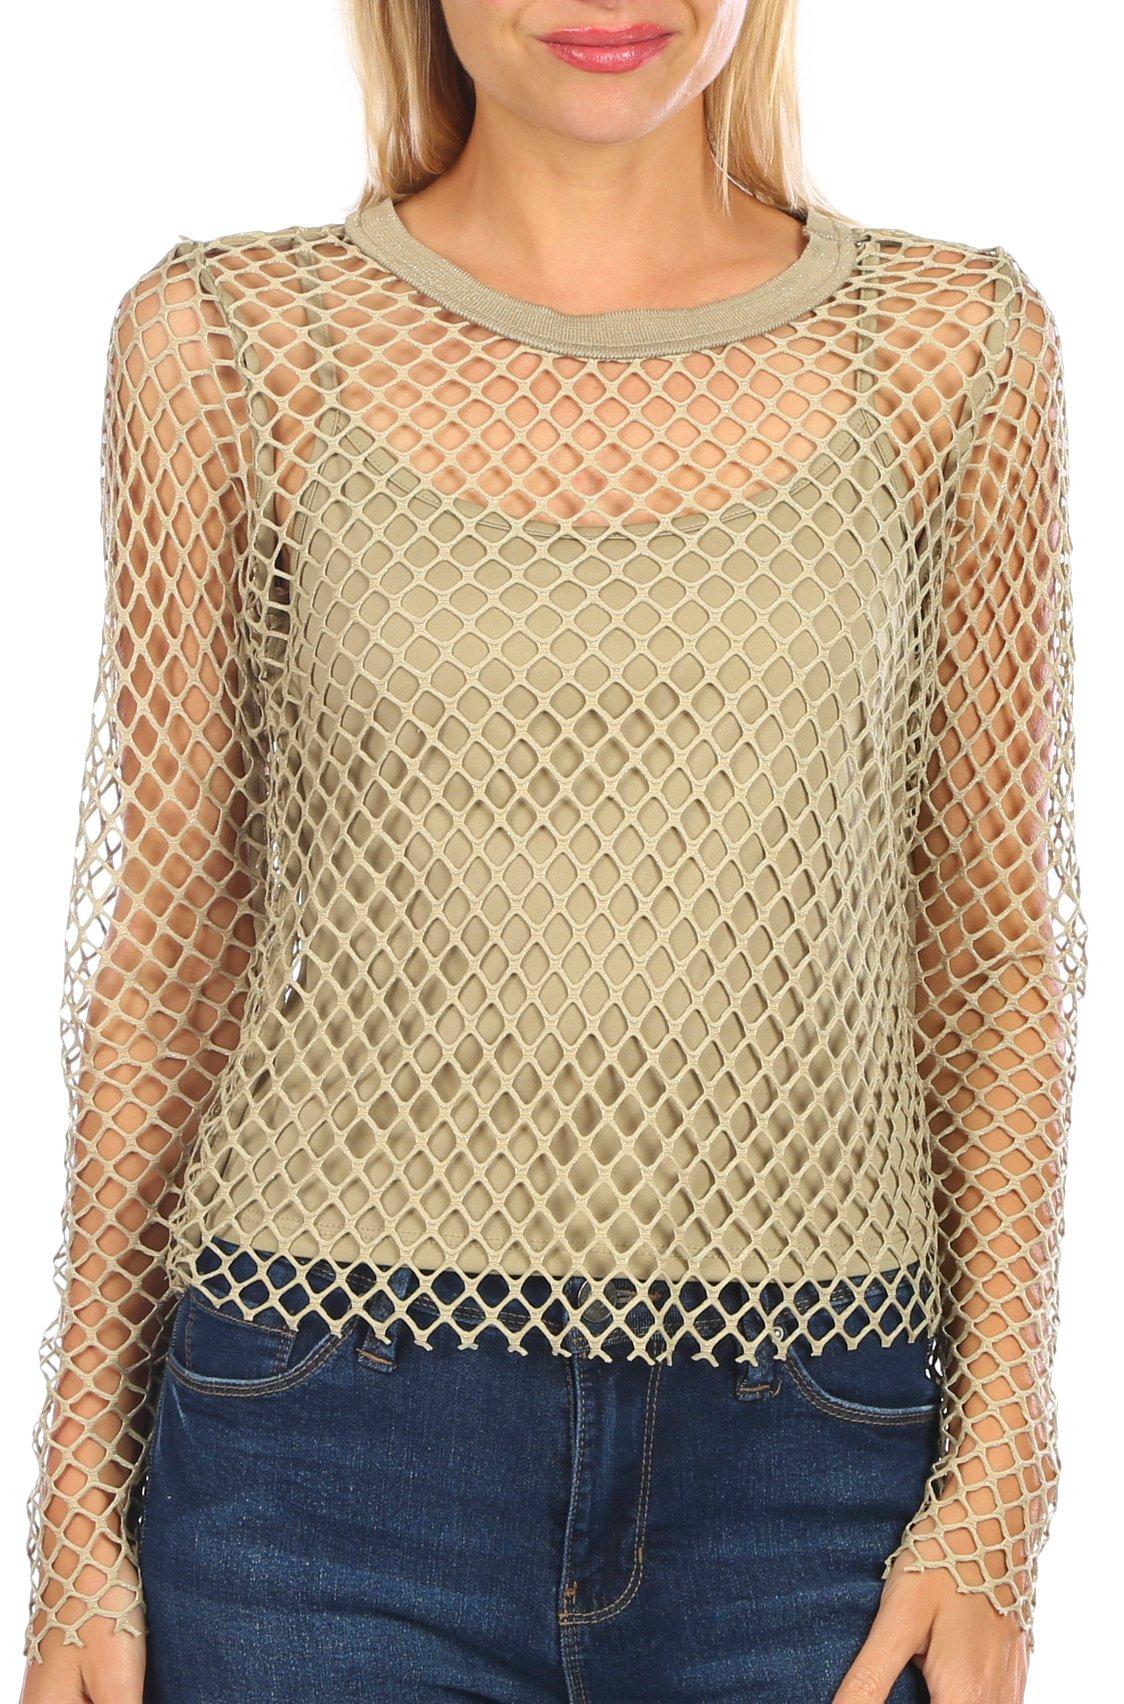 Almost Famous Juniors Long Sleeve Fishnet and Tank